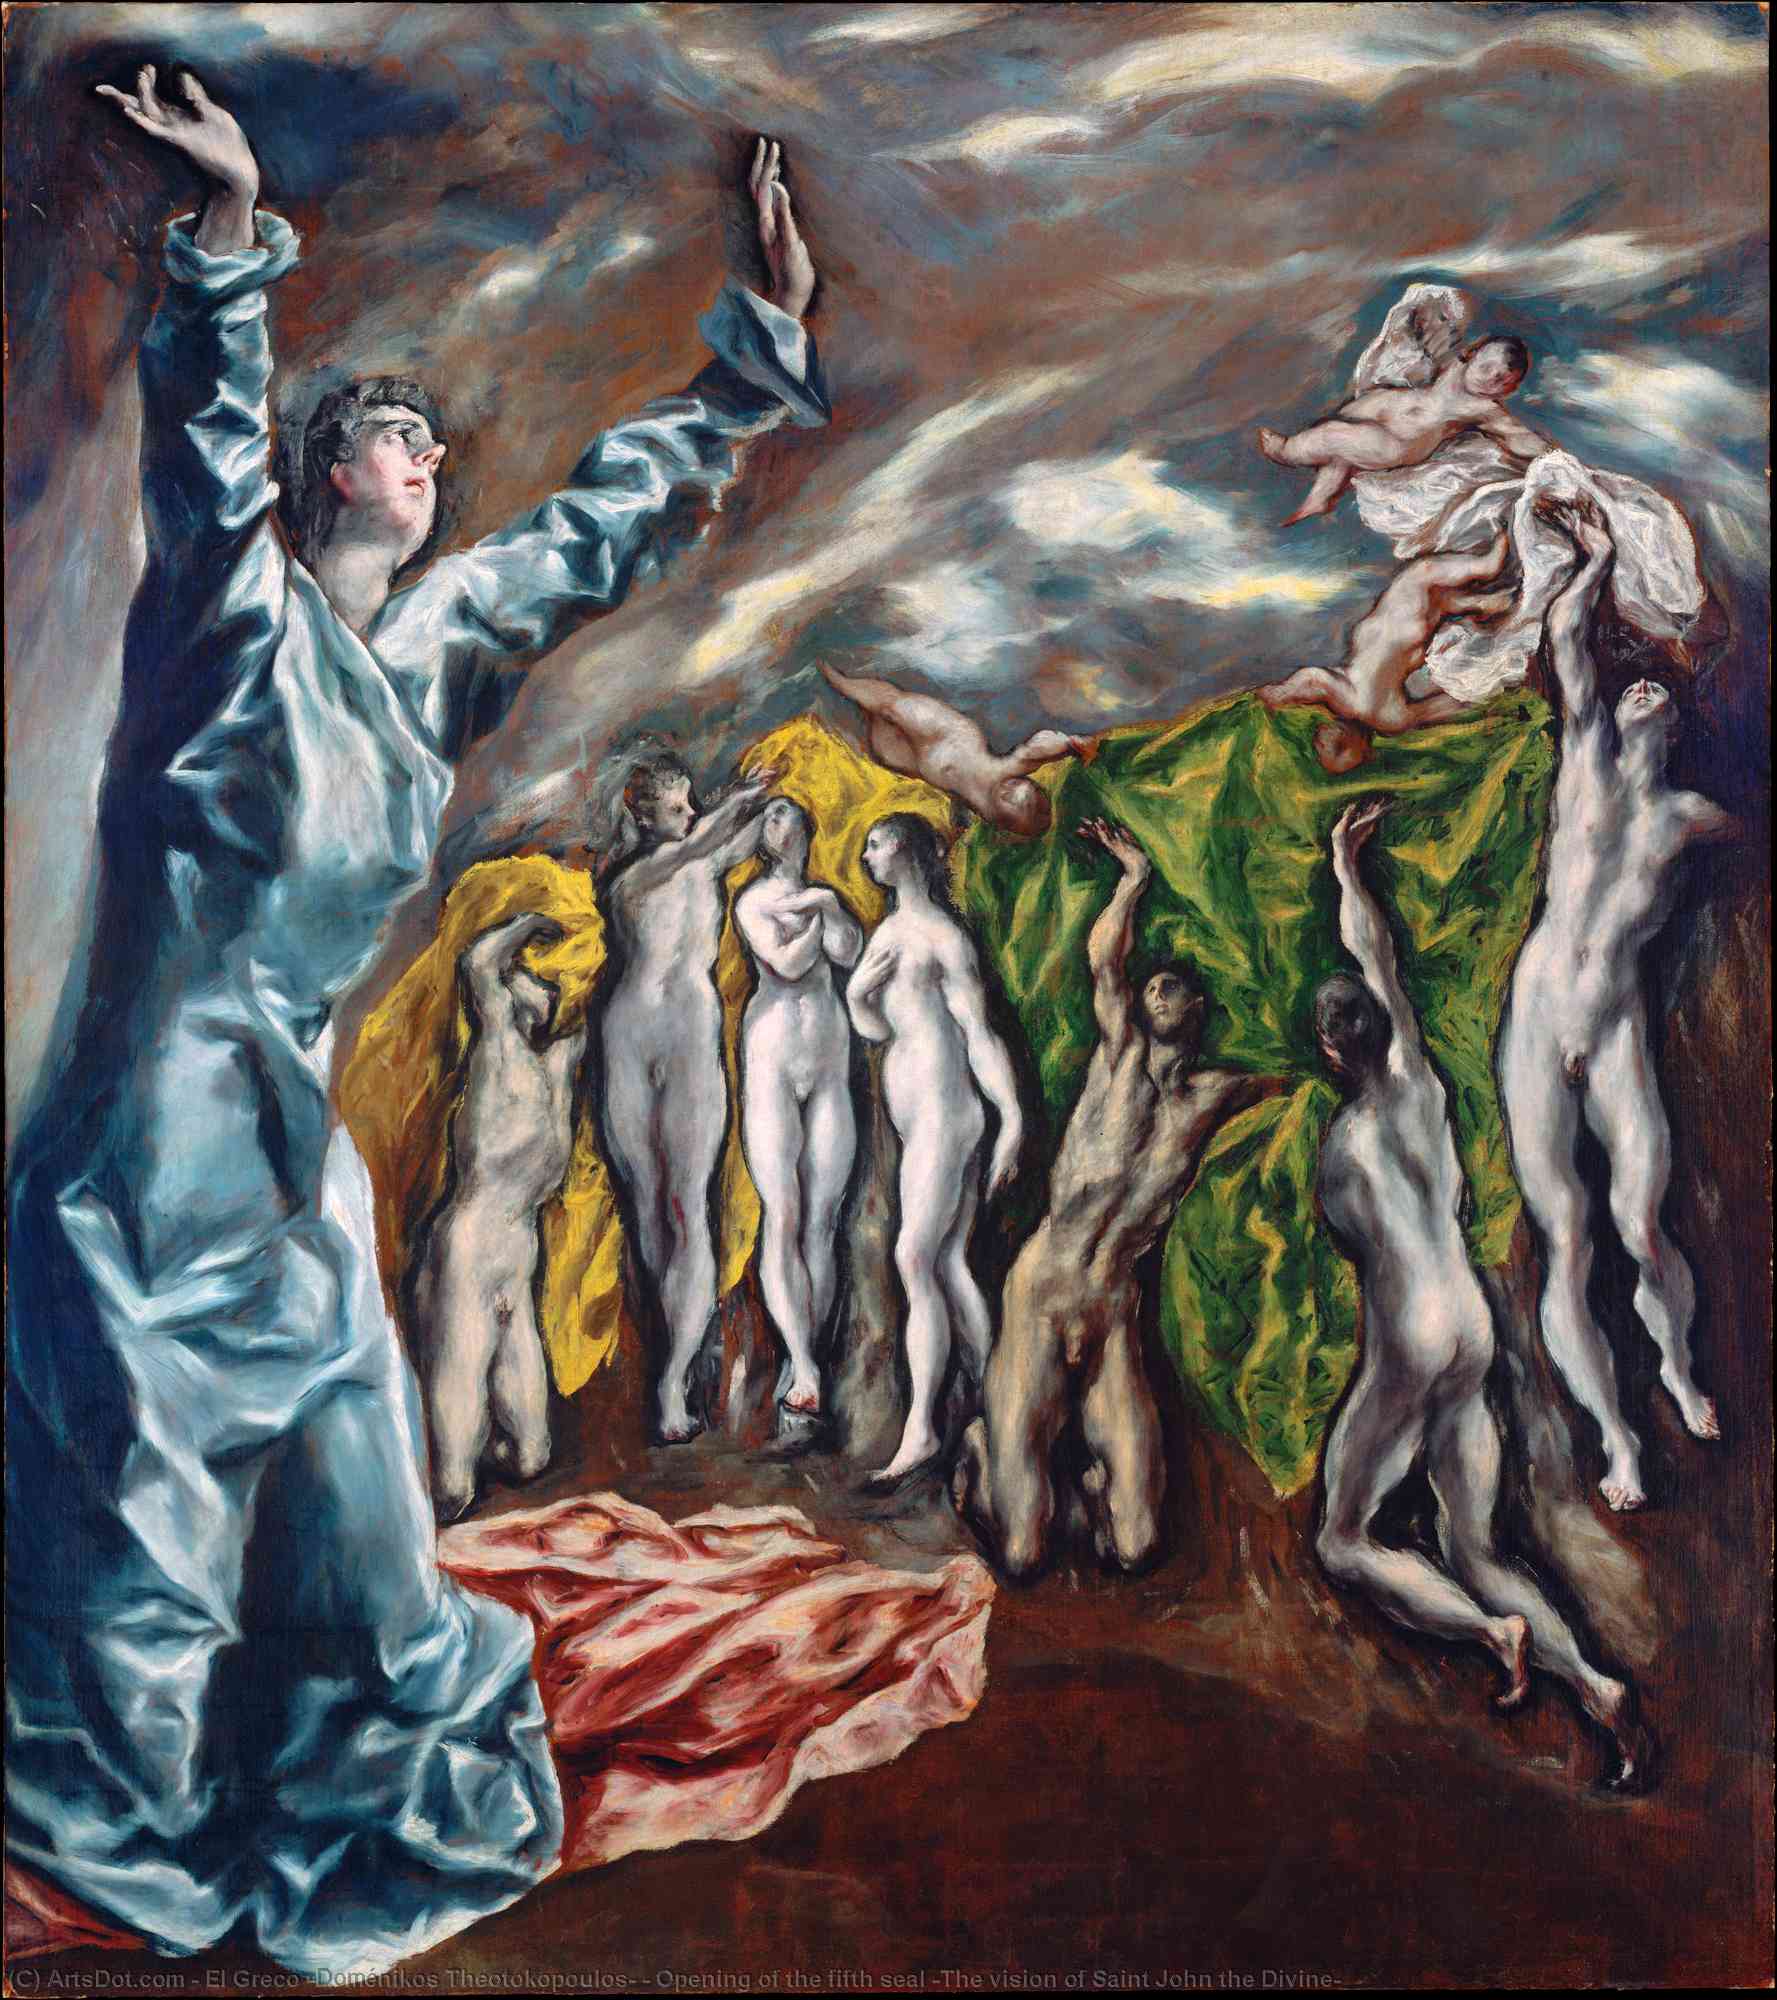 WikiOO.org - 백과 사전 - 회화, 삽화 El Greco (Doménikos Theotokopoulos) - Opening of the fifth seal (The vision of Saint John the Divine)